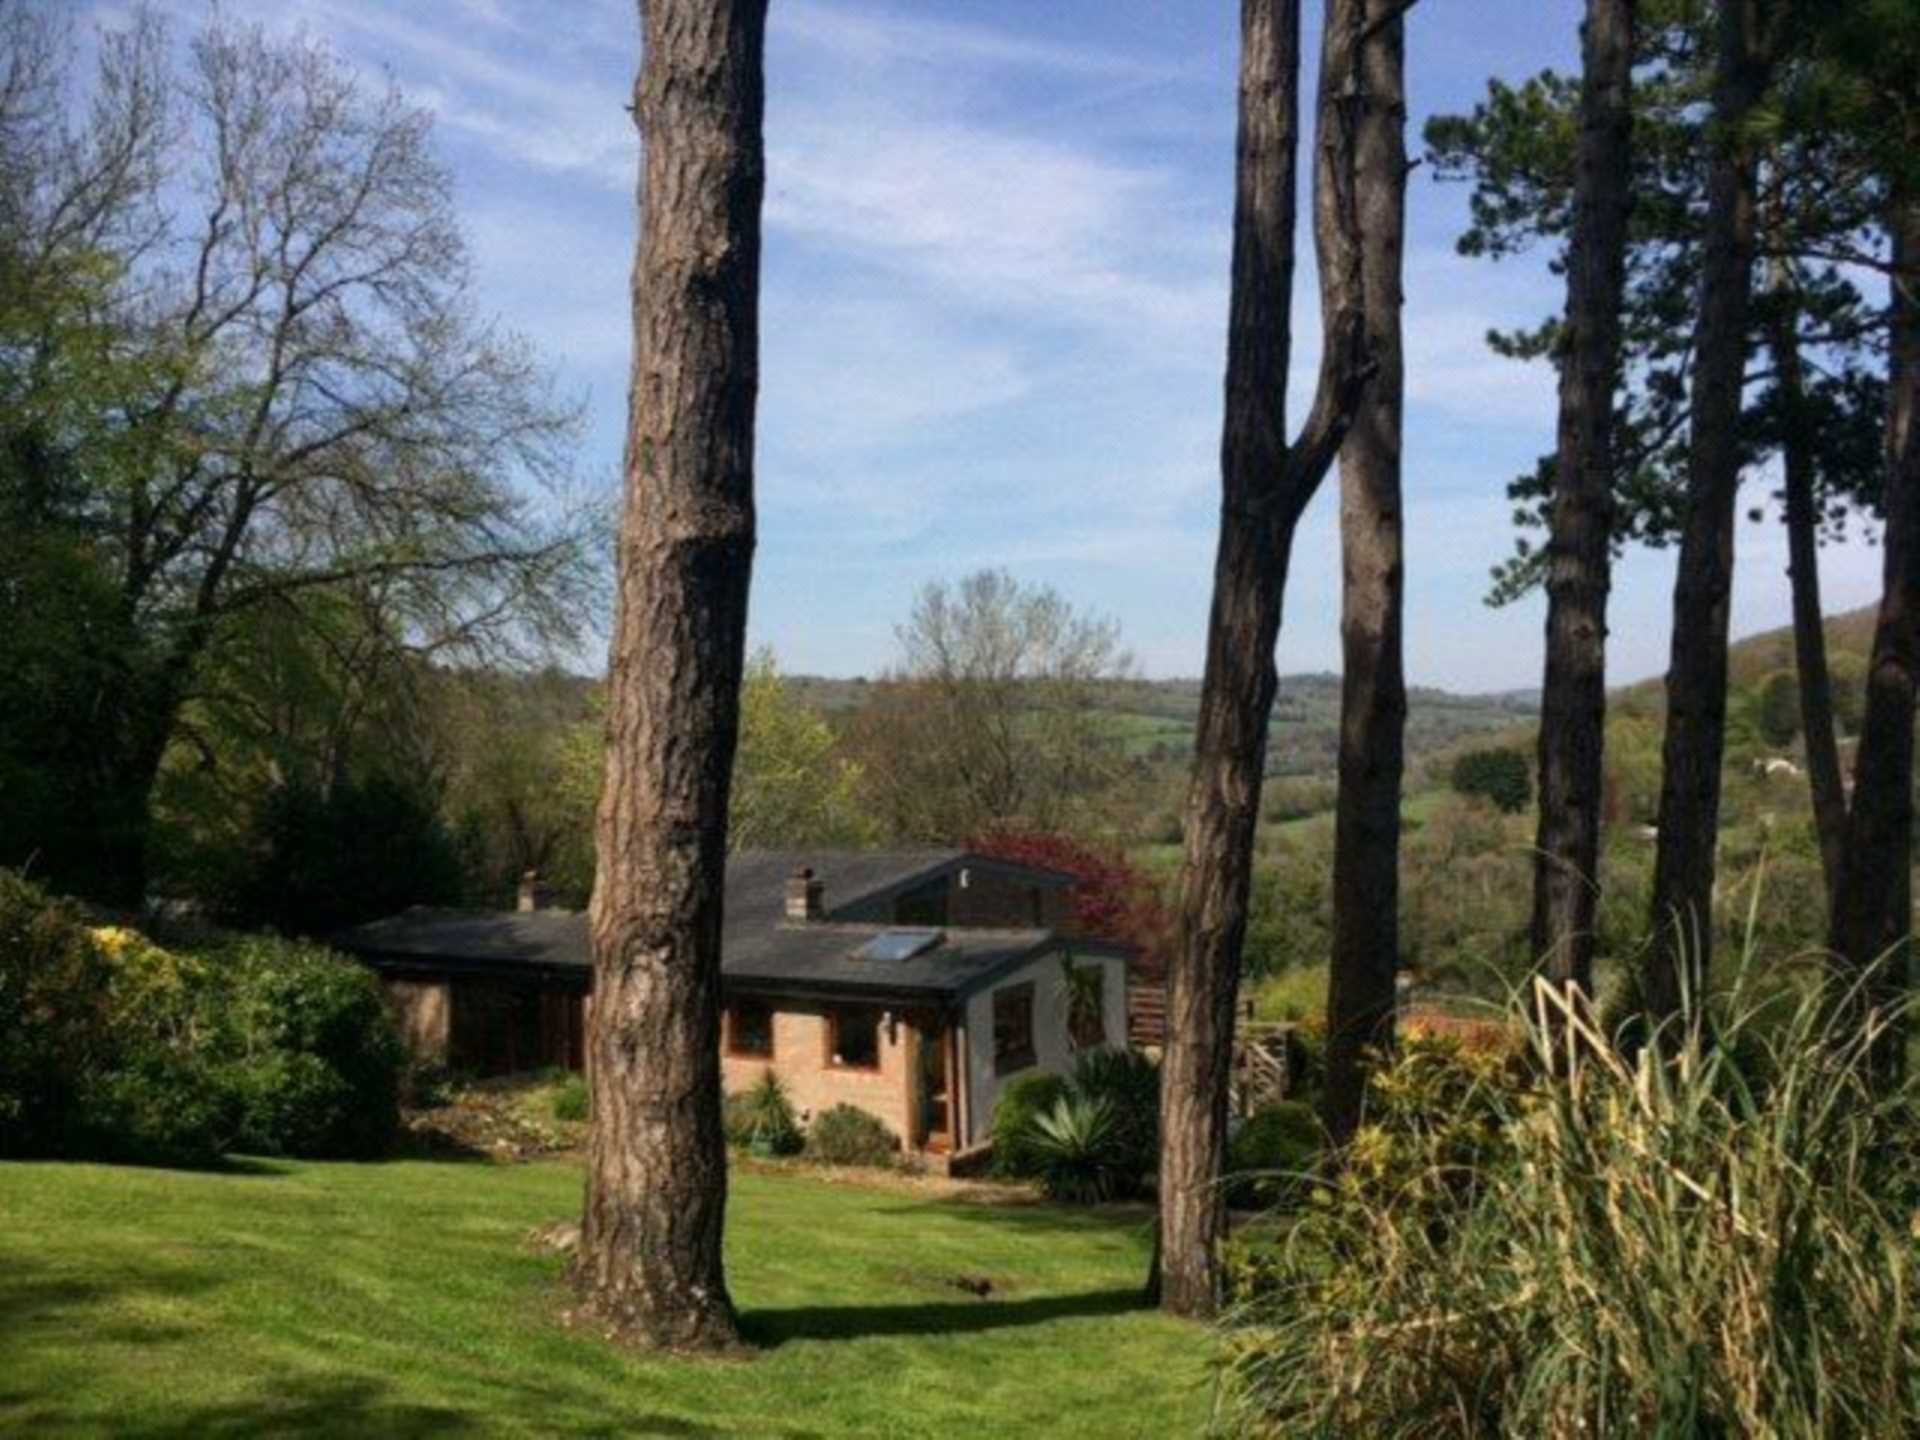 Swallows Property Letting - 4 Bedroom House, Limpley Stoke, Bath